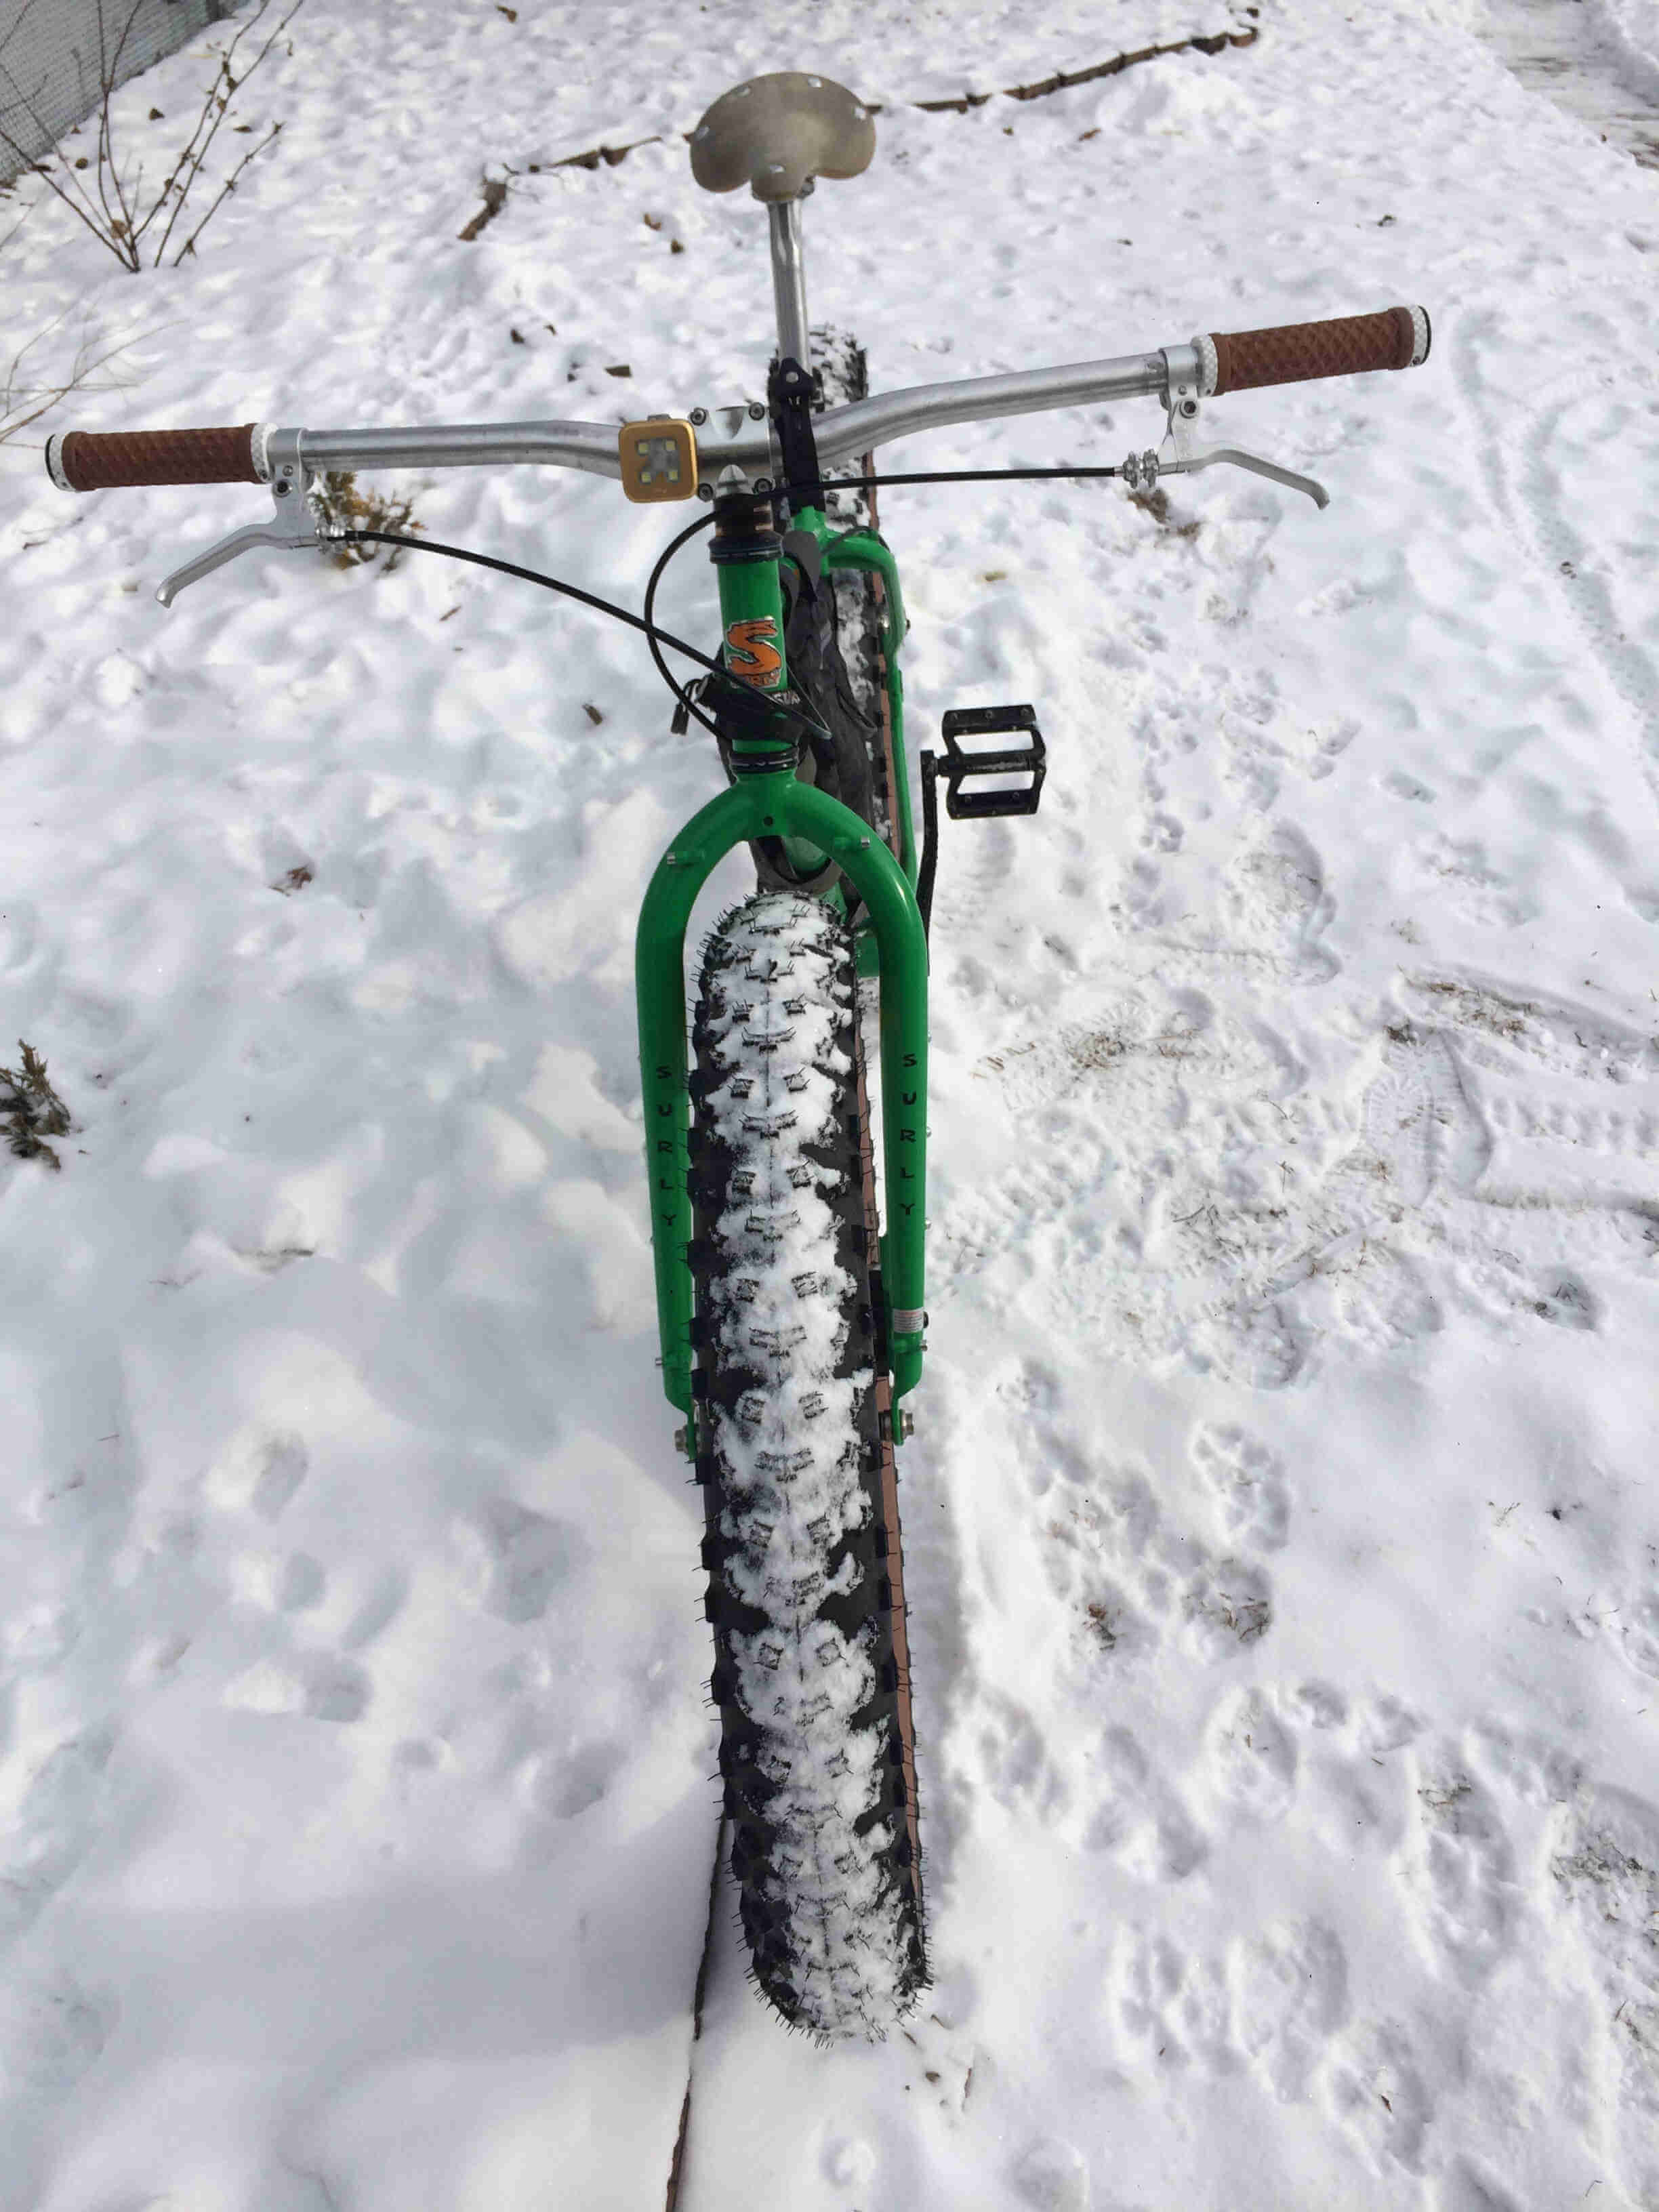 Front view of a green Surly Pugsley fat bike with offset forks, parked on snowy ground